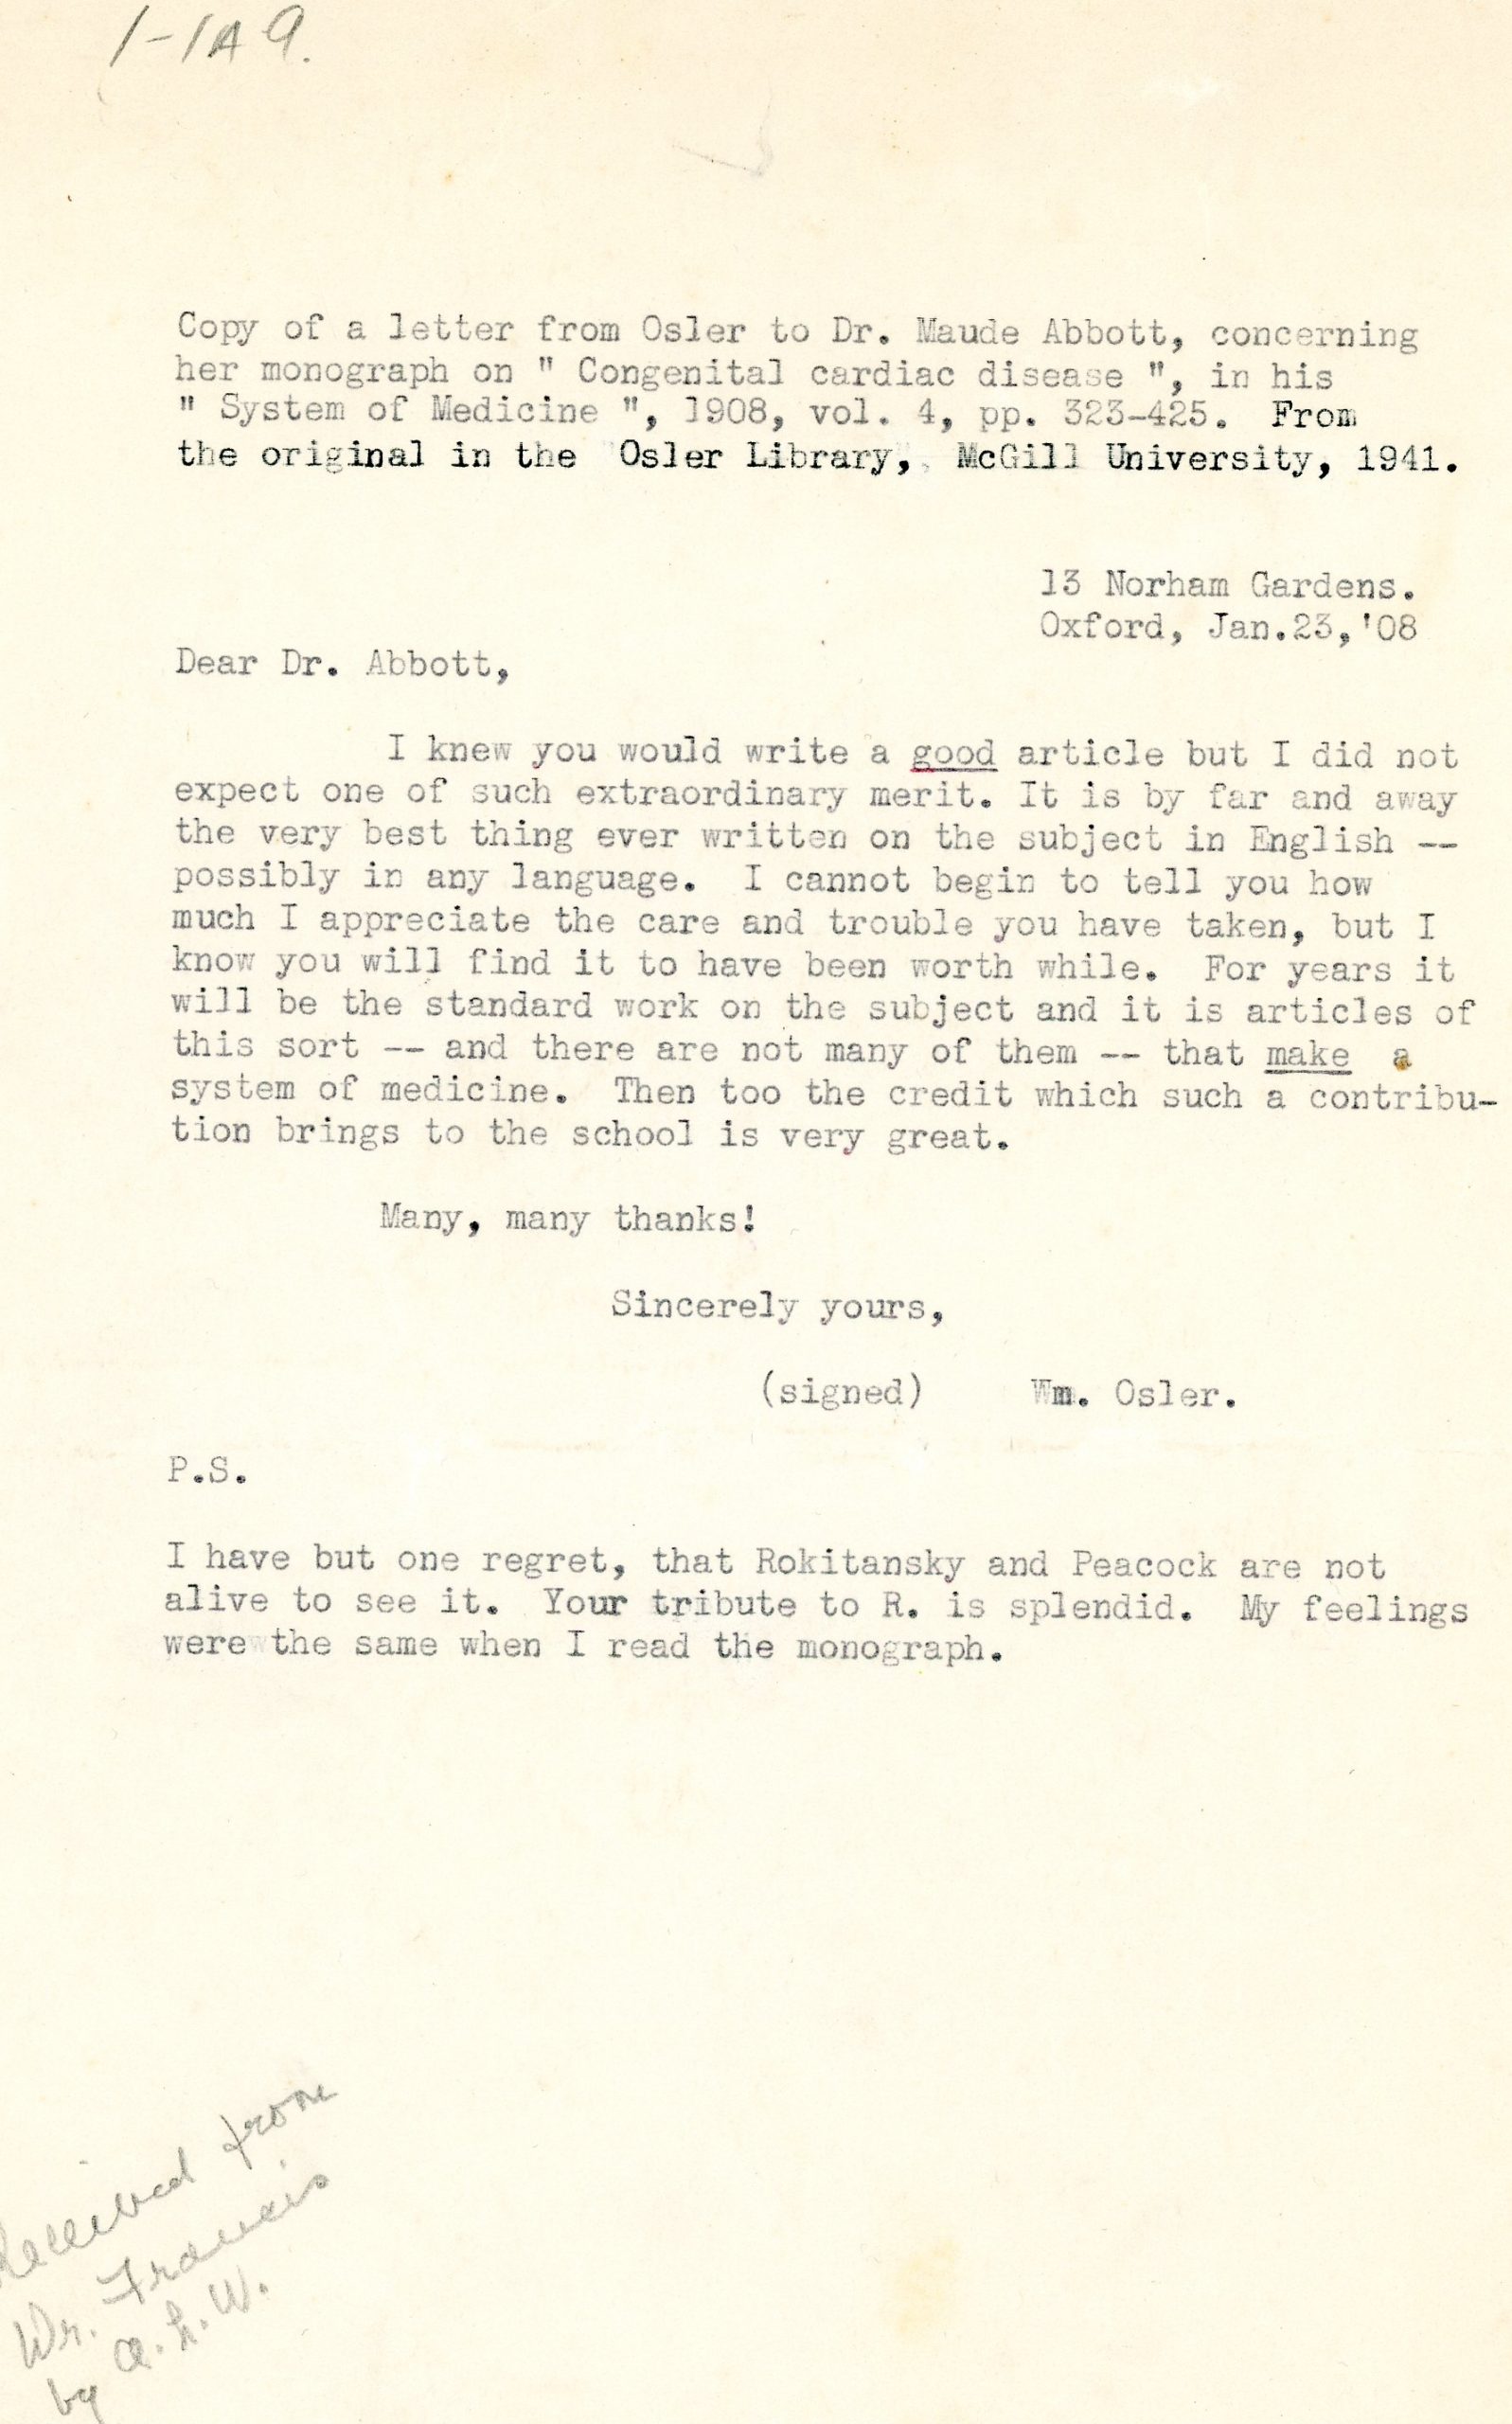 Copy of a letter from Dr. Osler to Dr. Maude Abbott dated January 23, 1908, black ink on sepia paper. The doctor congratulates her on the quality of an article she wrote.